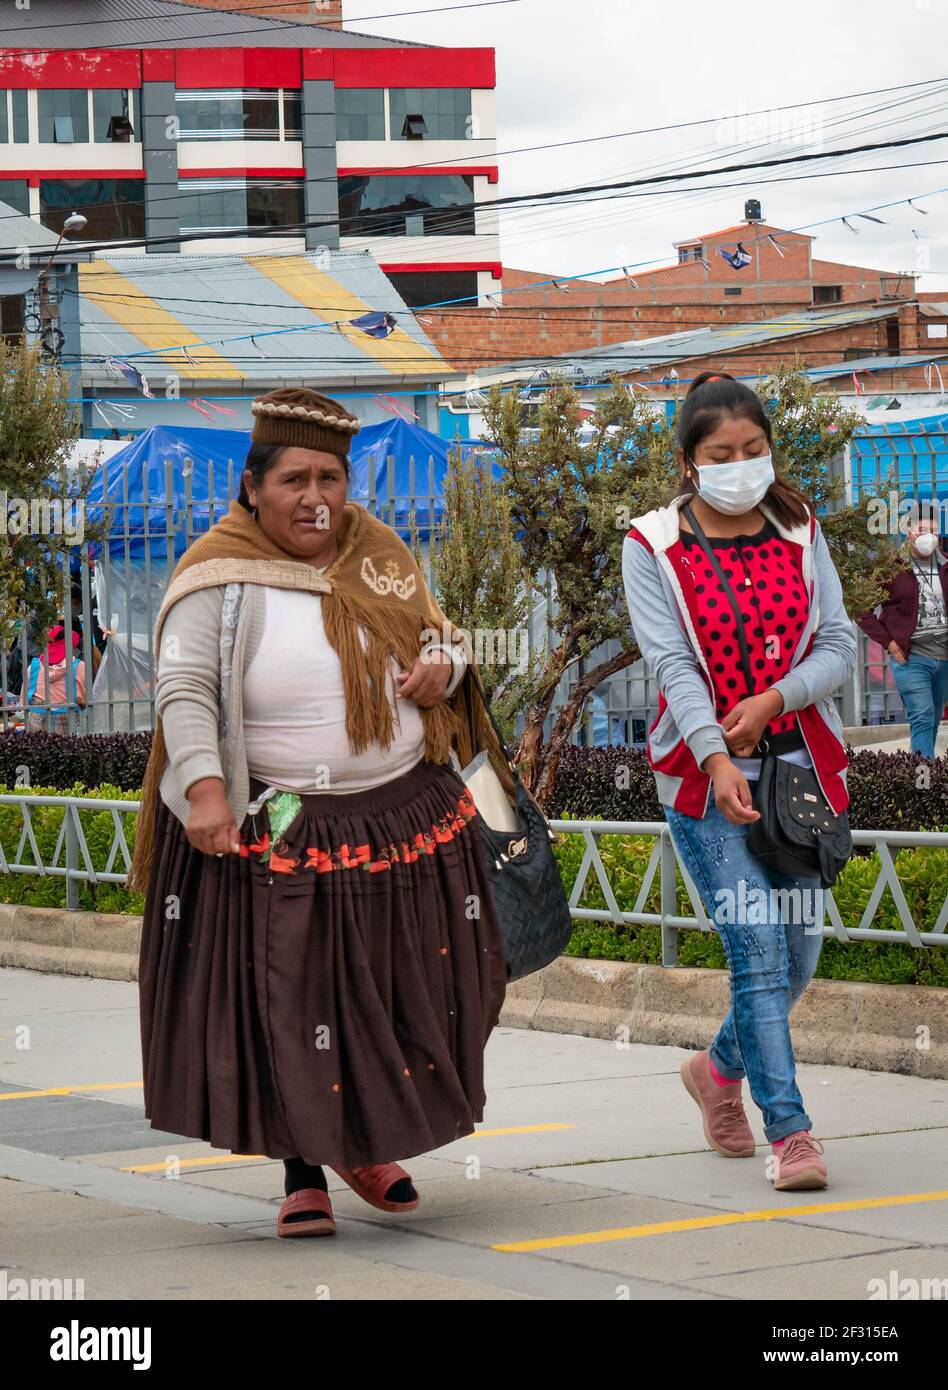 El Alto, La Paz, Bolivia - February 11 2021: Bolivian Indigenous Woman Known as 'Cholita', is Walking with a Young Woman Wearing a Mask Stock Photo